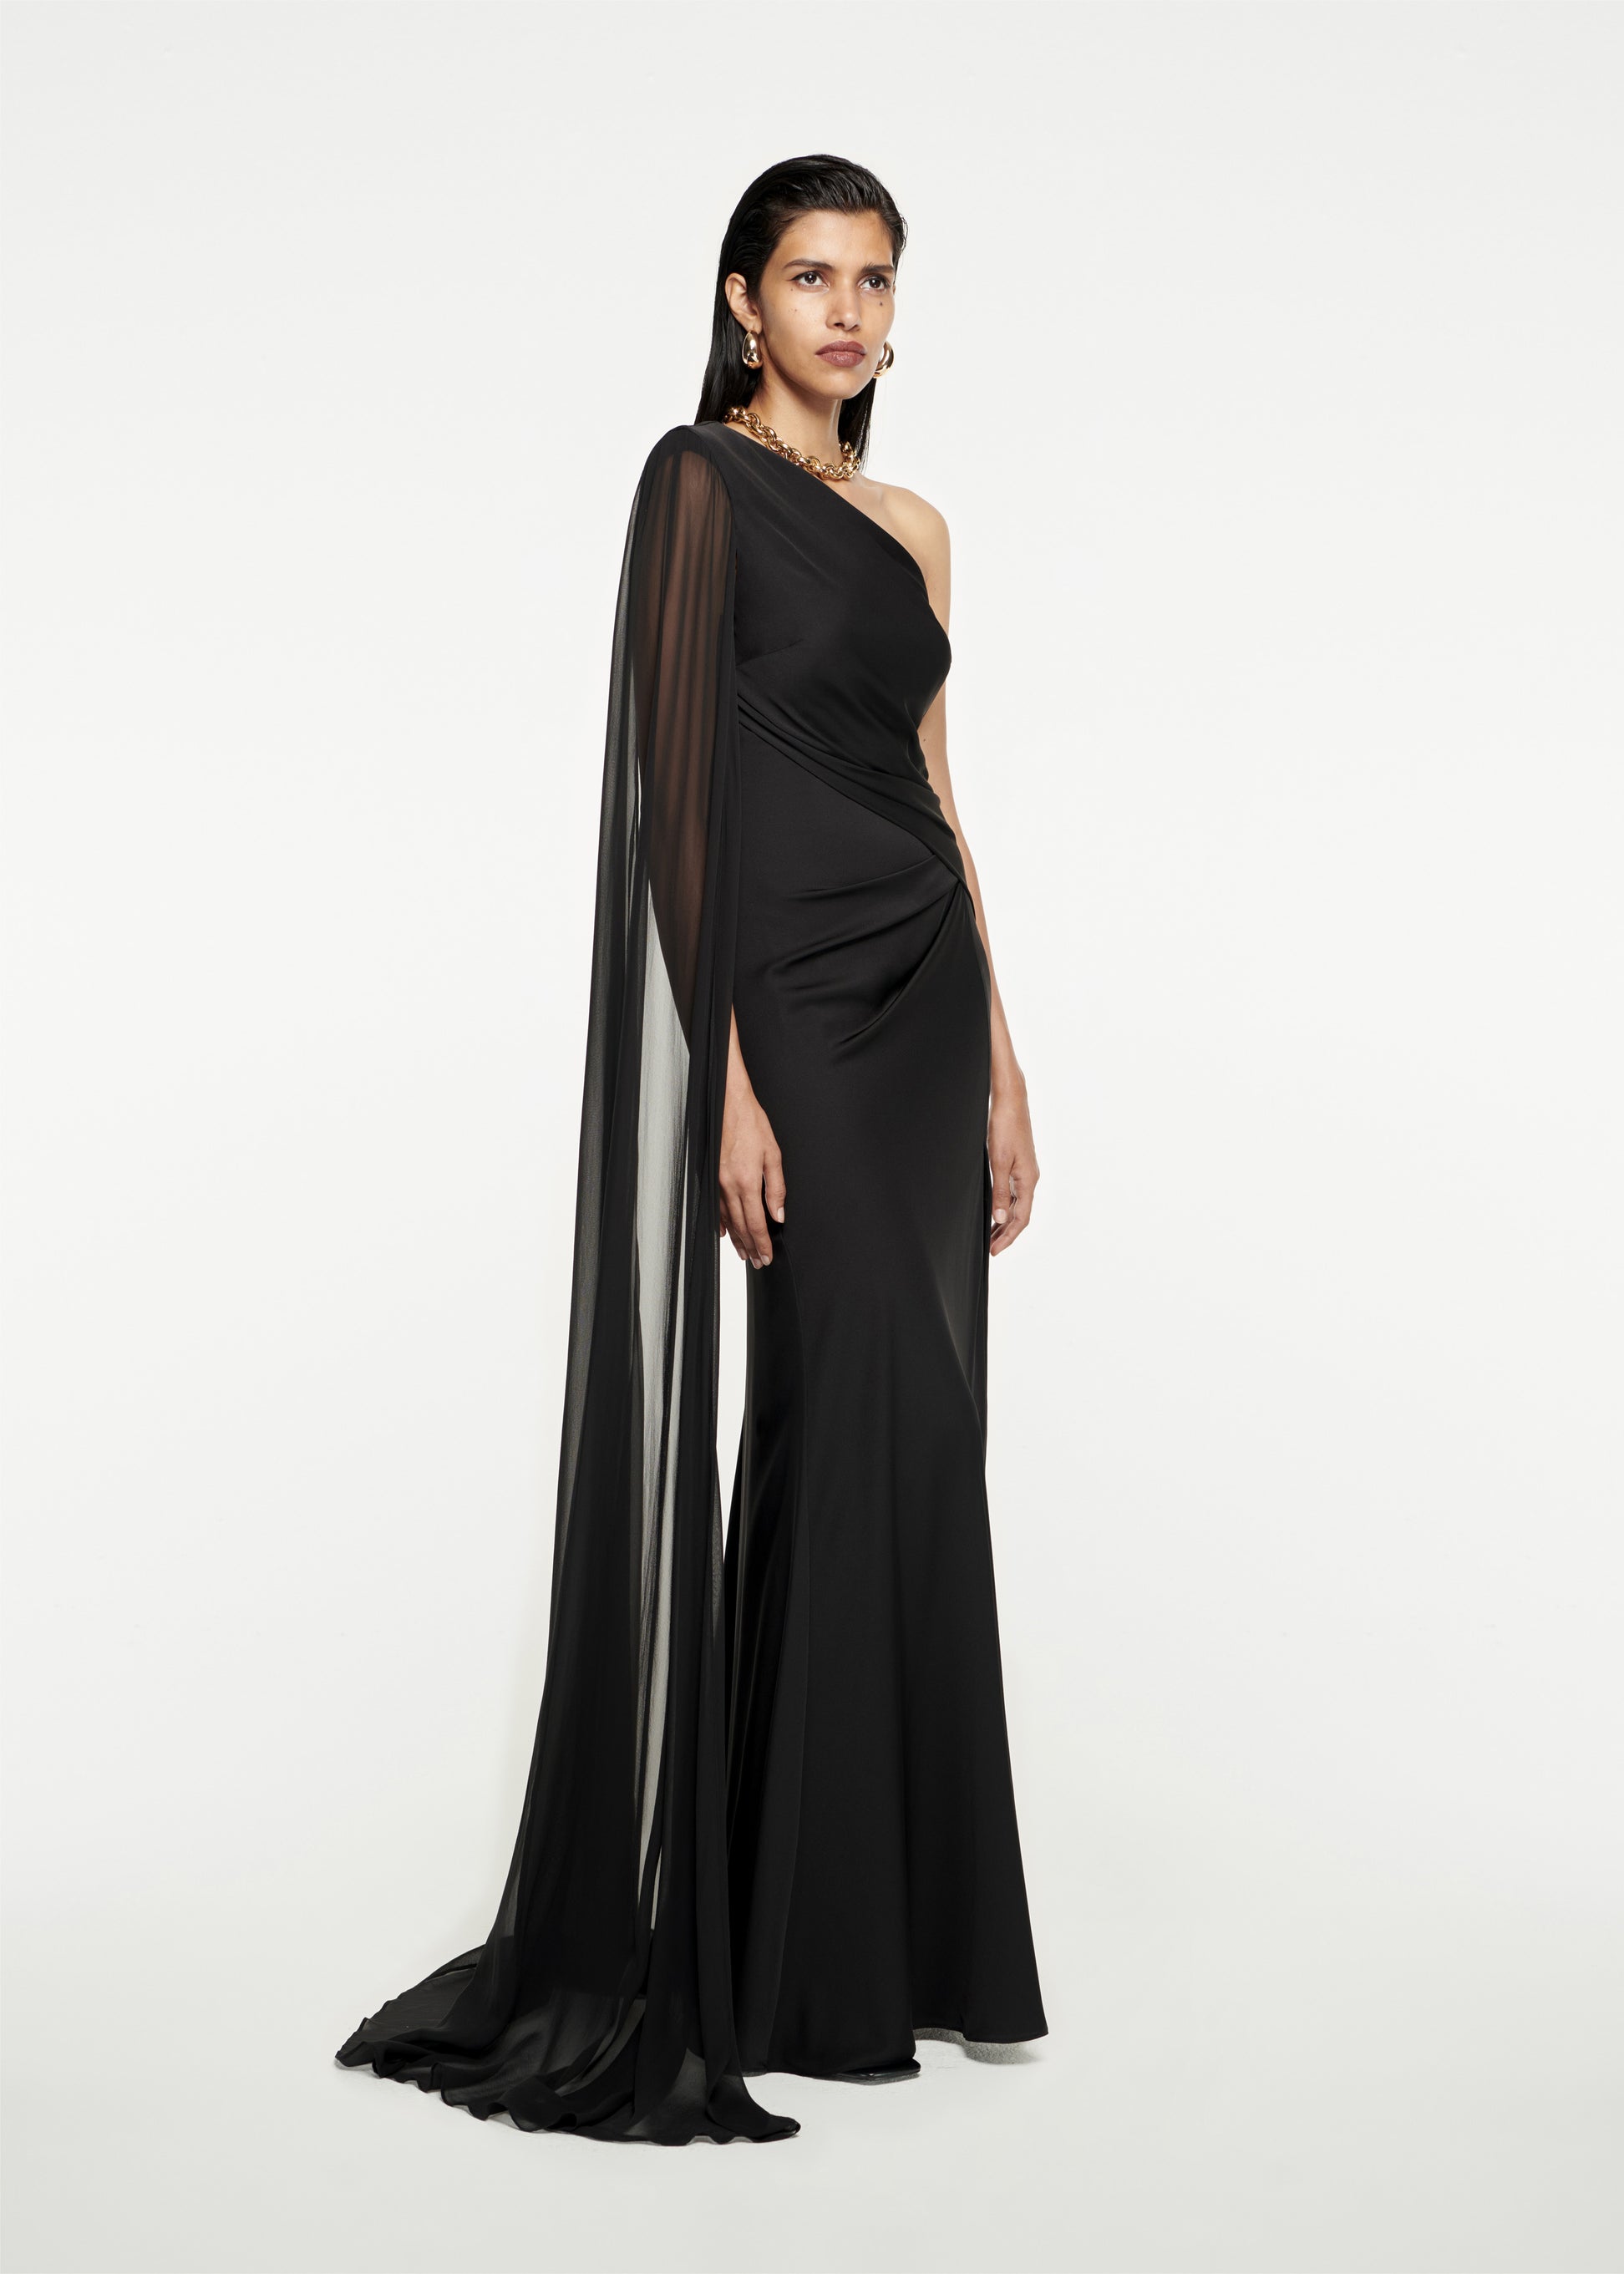 Woman wearing the Asymmetric Stretch Silk Crepe Gown in Black